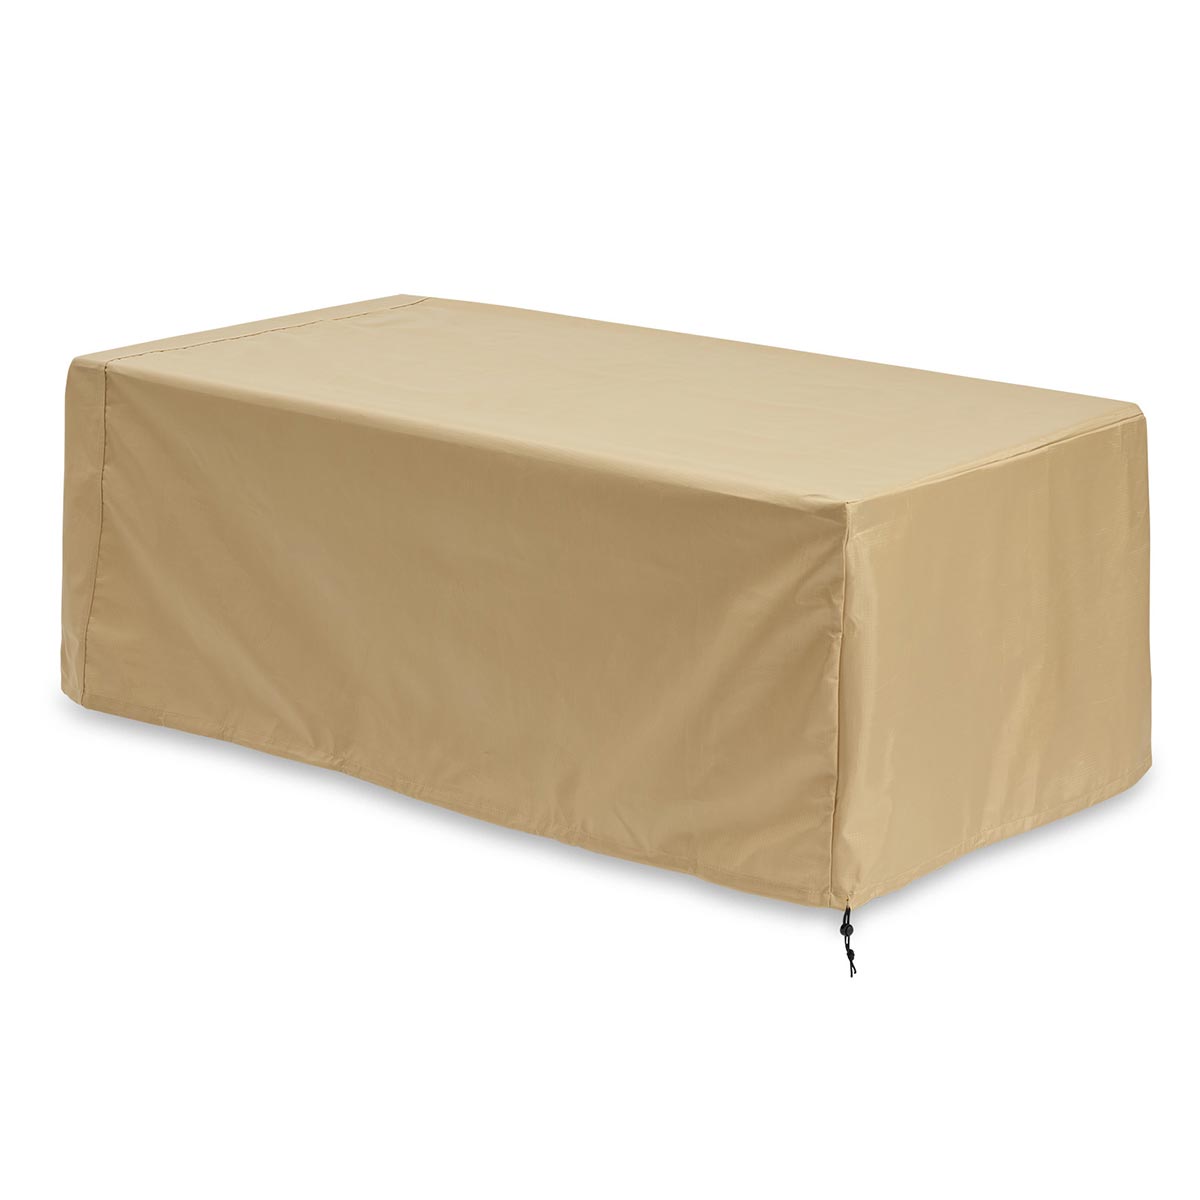 Weather-resistant Protective Cover for Brooks, Kenwood Rectangular, and Sierra Linear Fire Tables CVR5132